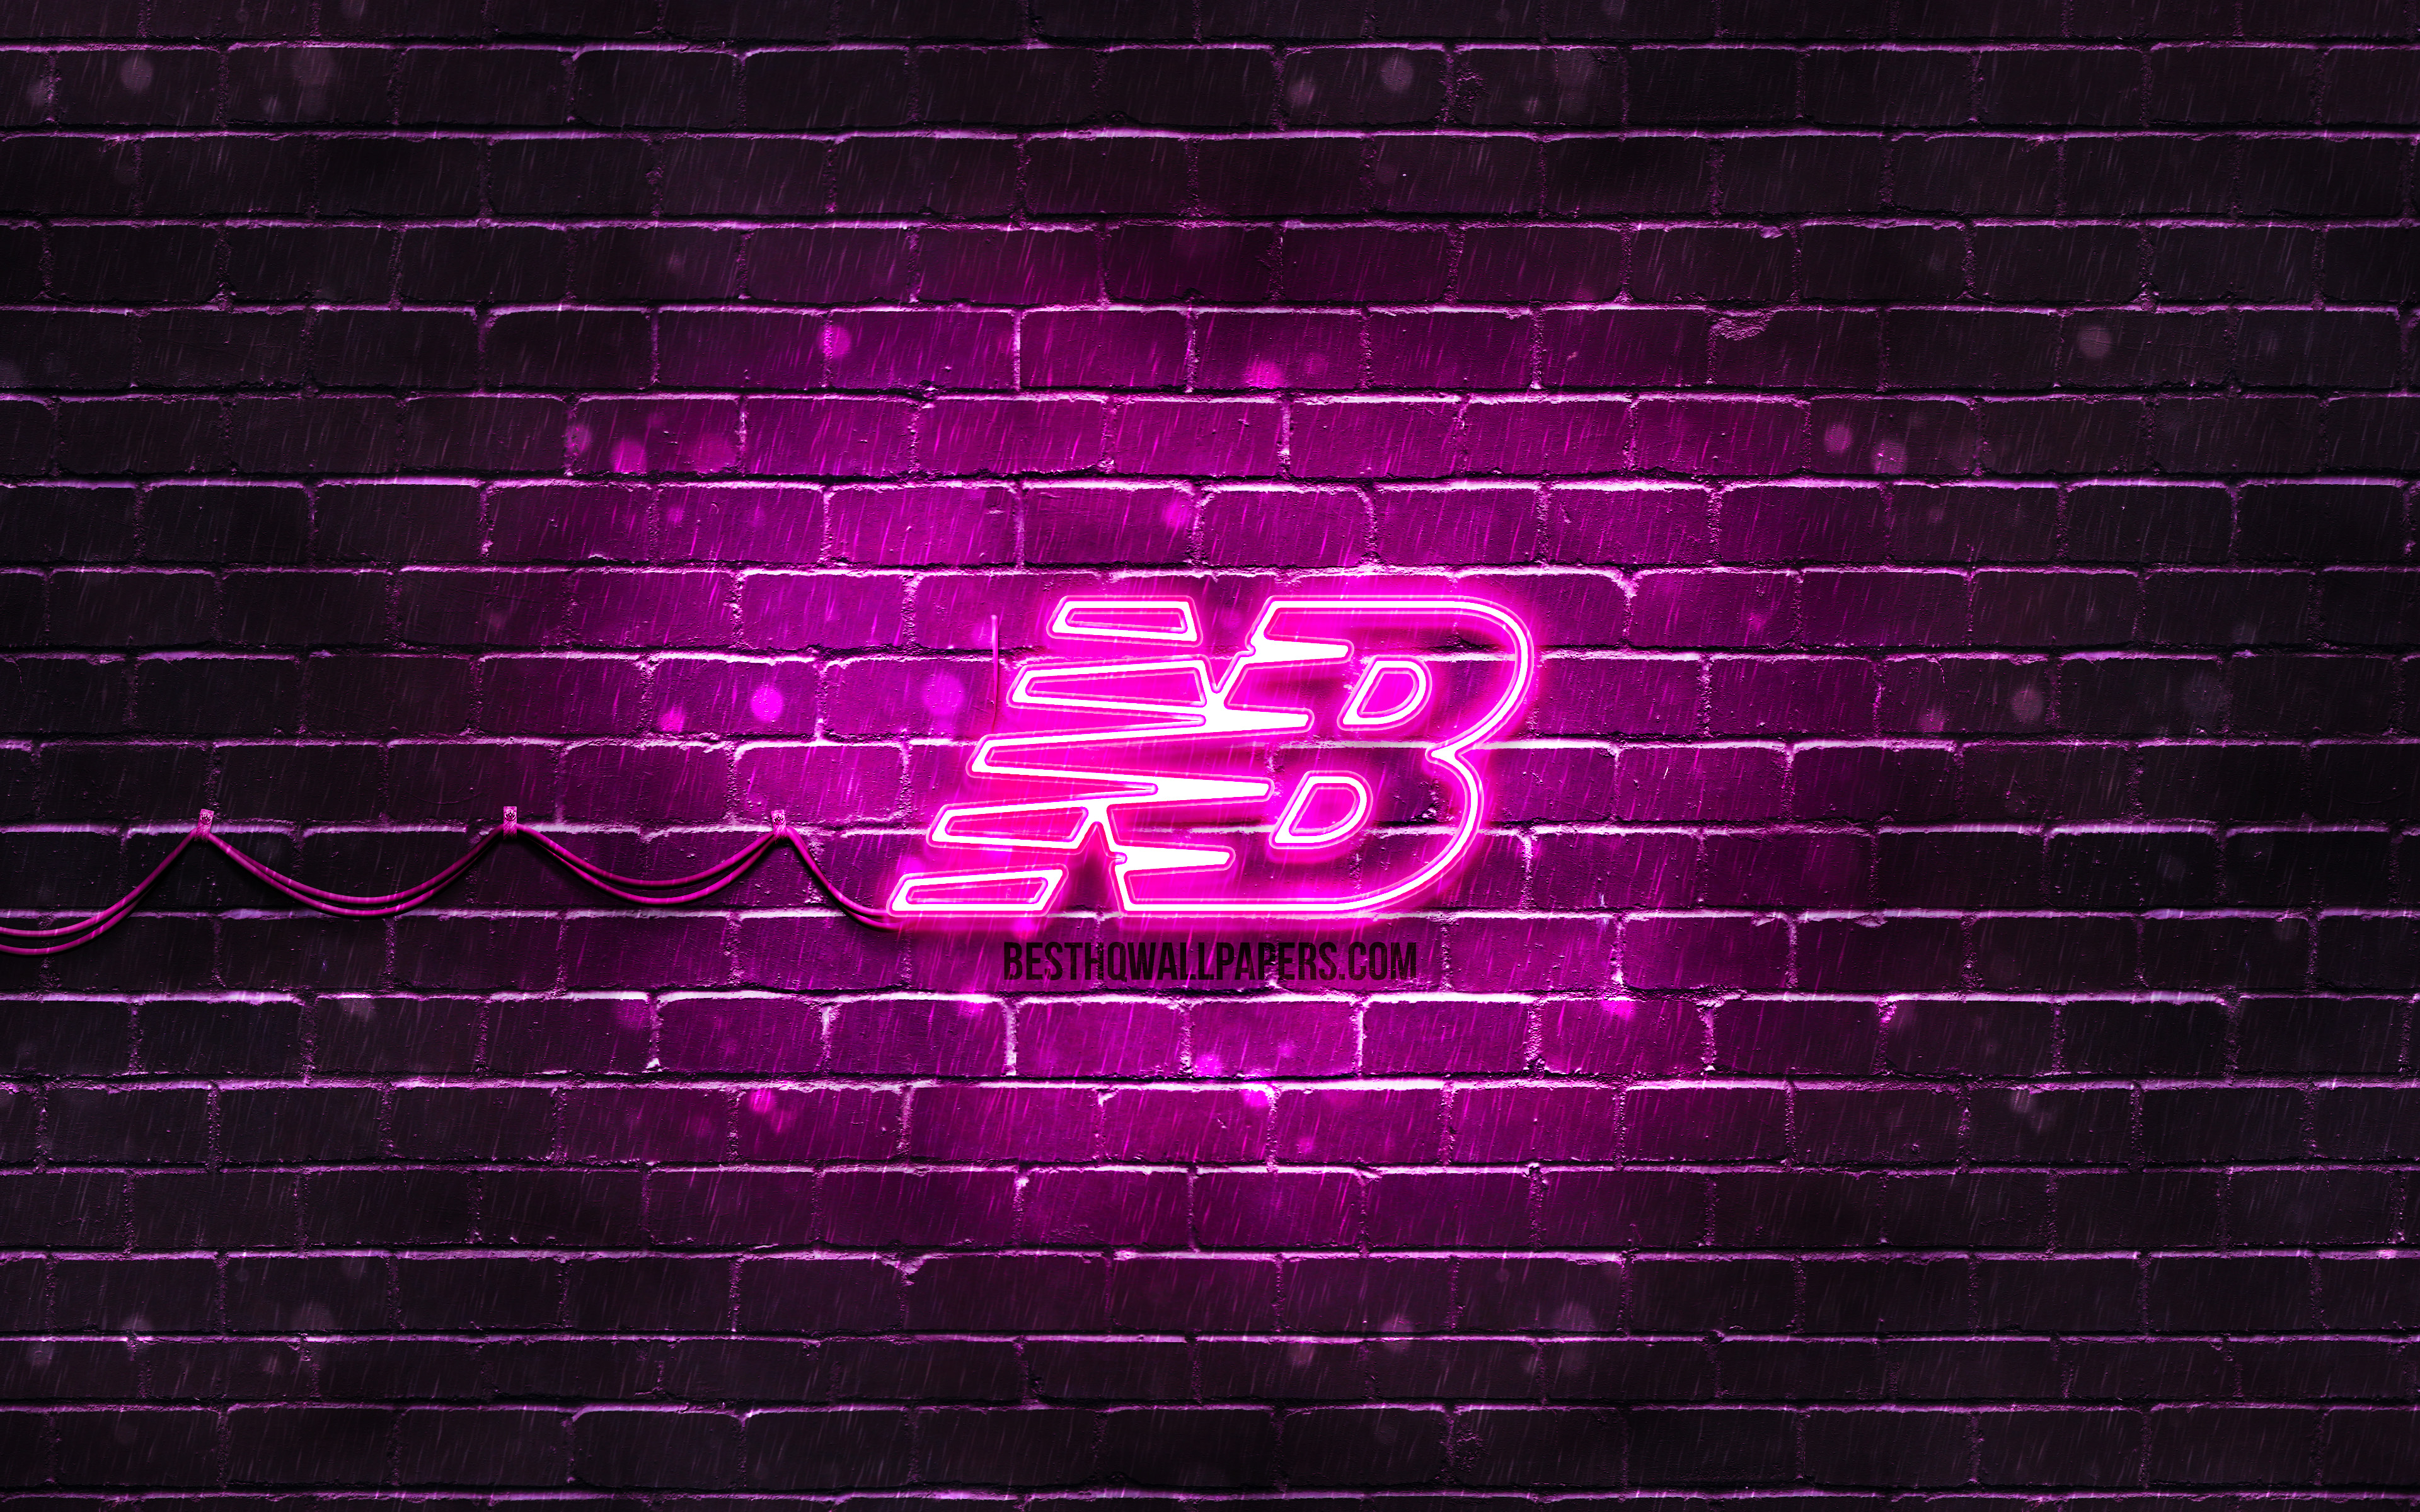 Download wallpaper New Balance purple logo, 4k, purple brickwall, New Balance logo, brands, New Balance neon logo, New Balance for desktop with resolution 3840x2400. High Quality HD picture wallpaper